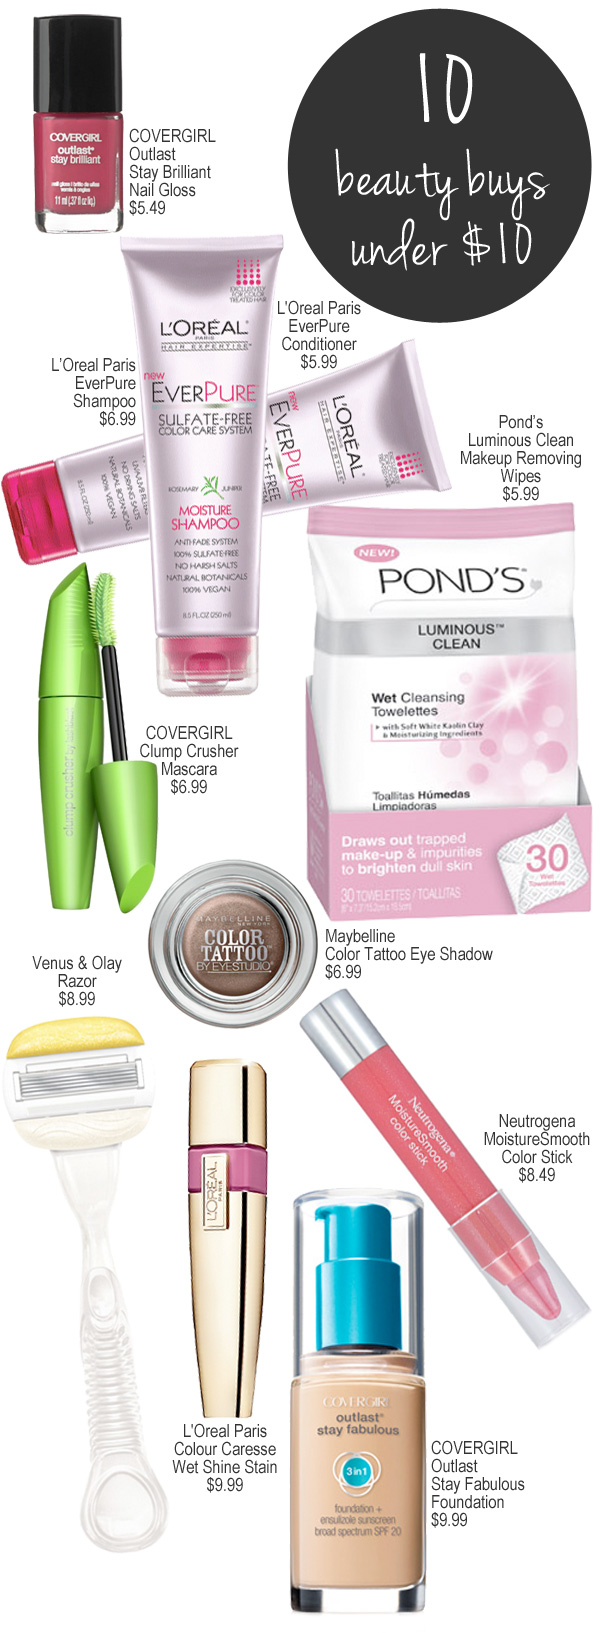 Top 10 Beauty Buys Under $10.00